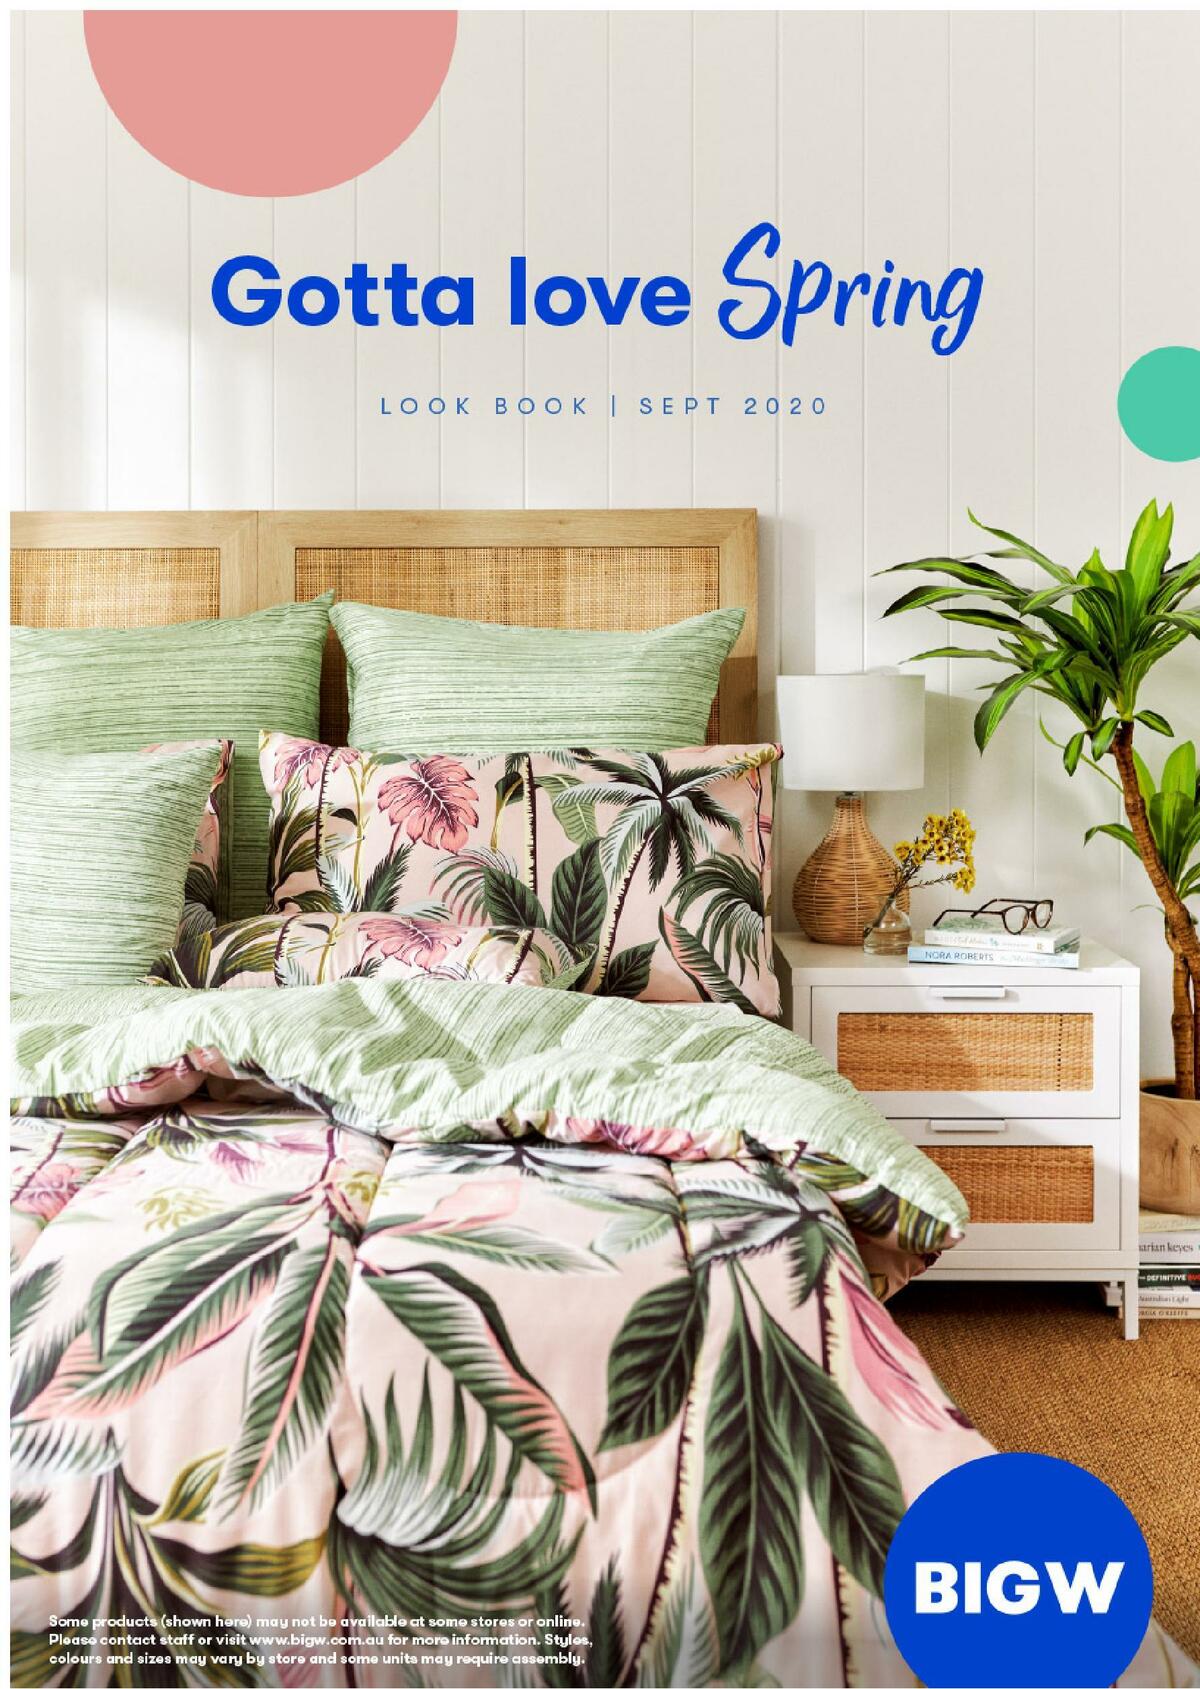 Big W Gotta Love Spring Lookbook Catalogues from 3 September